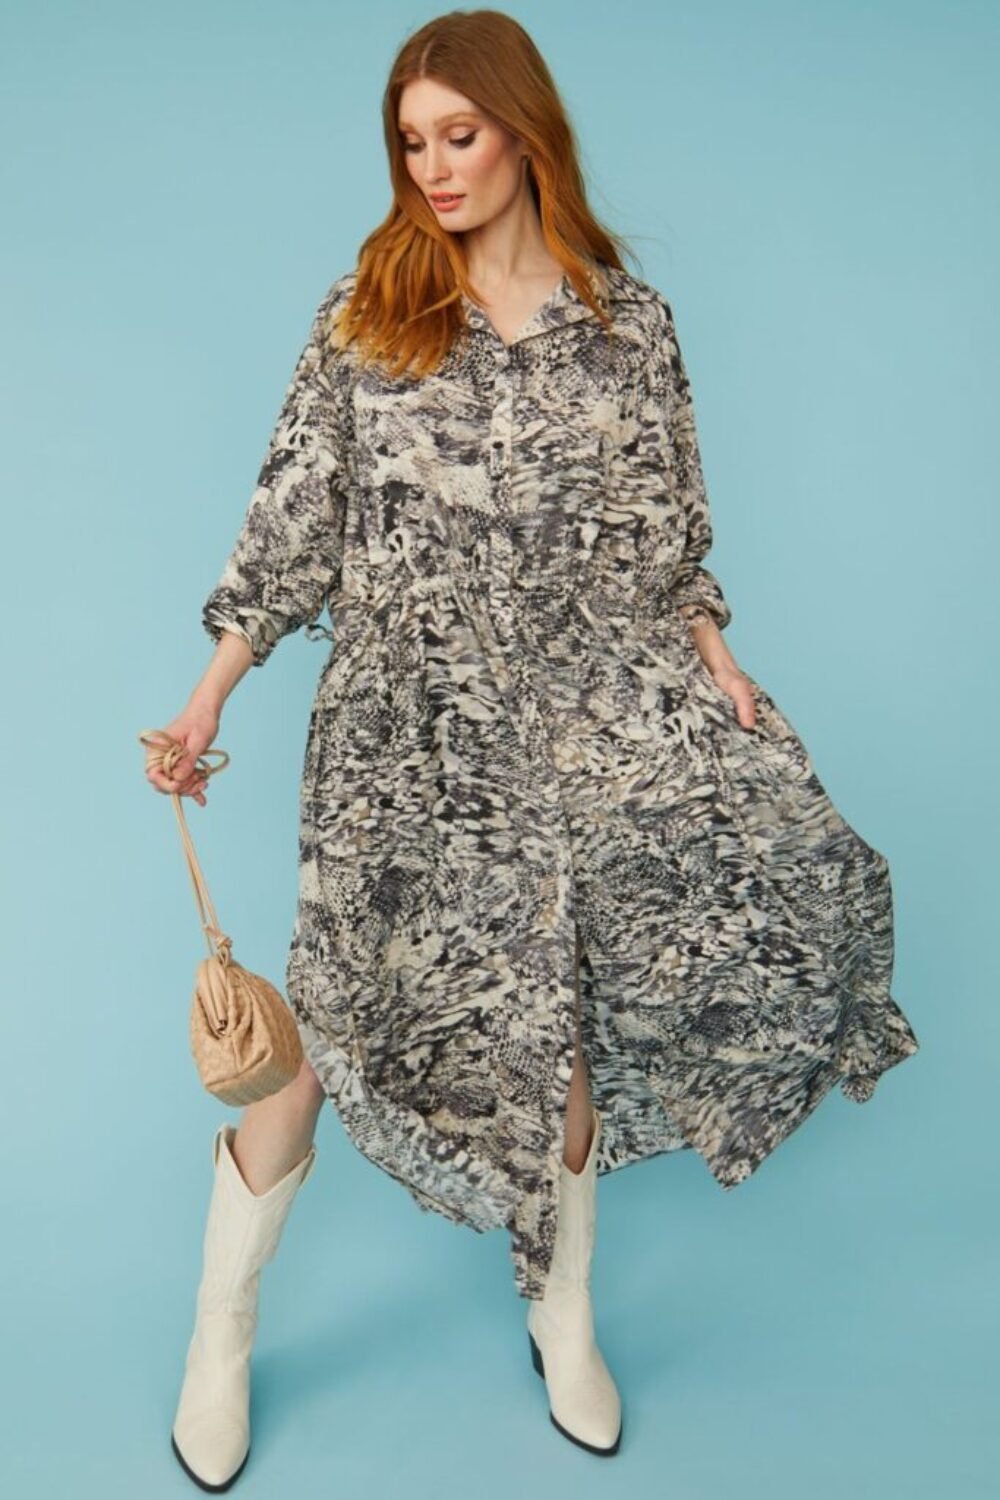 Shop Lux Maxi Grey Silk Blend Snake print Dress and women's luxury and designer clothes at www.lux-apparel.co.uk